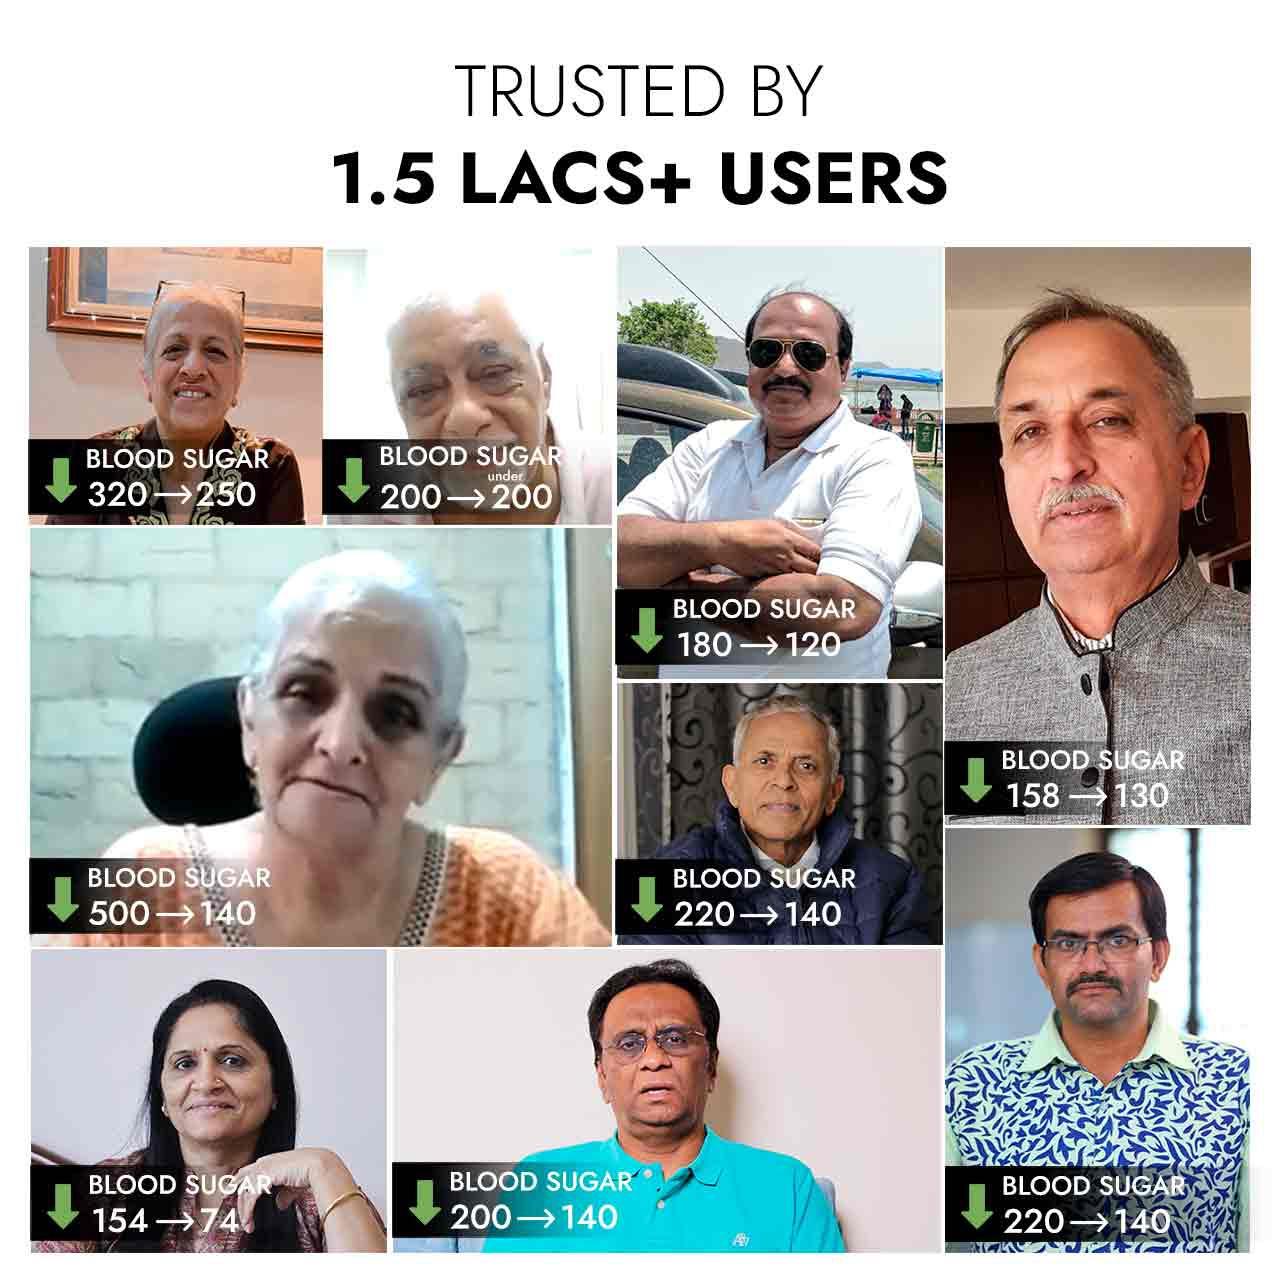 Trusted by 1.5 lac+ users

Compilation of testimonials from customers who have seen desired drop in blood-sugar levels after consuming Dia Free Juice